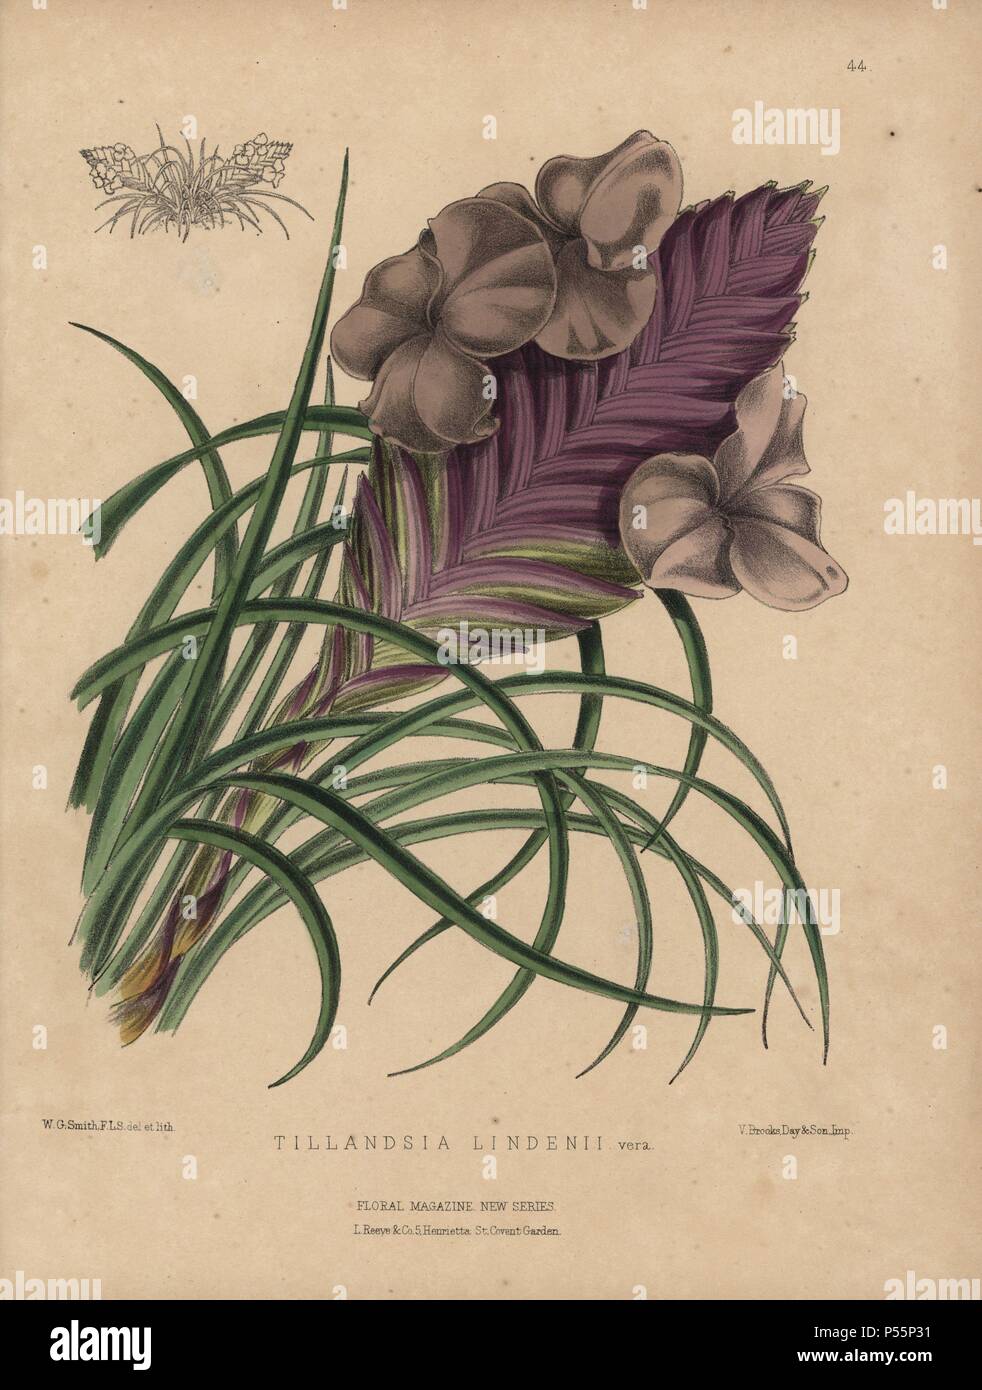 Airplant with lilac and mauve flowers. Tillandsia lindenii. Handcolored botanical drawn and lithographed by W.G. Smith from H.H. Dombrain's 'Floral Magazine' 1872.. Worthington G. Smith (1835-1917), architect, engraver and mycologist. Smith also illustrated 'The Gardener's Chronicle.' Henry Honywood Dombrain (1818-1905), clergyman gardener, was editor of the 'Floral Magazine' from 1862 to 1873. Stock Photo